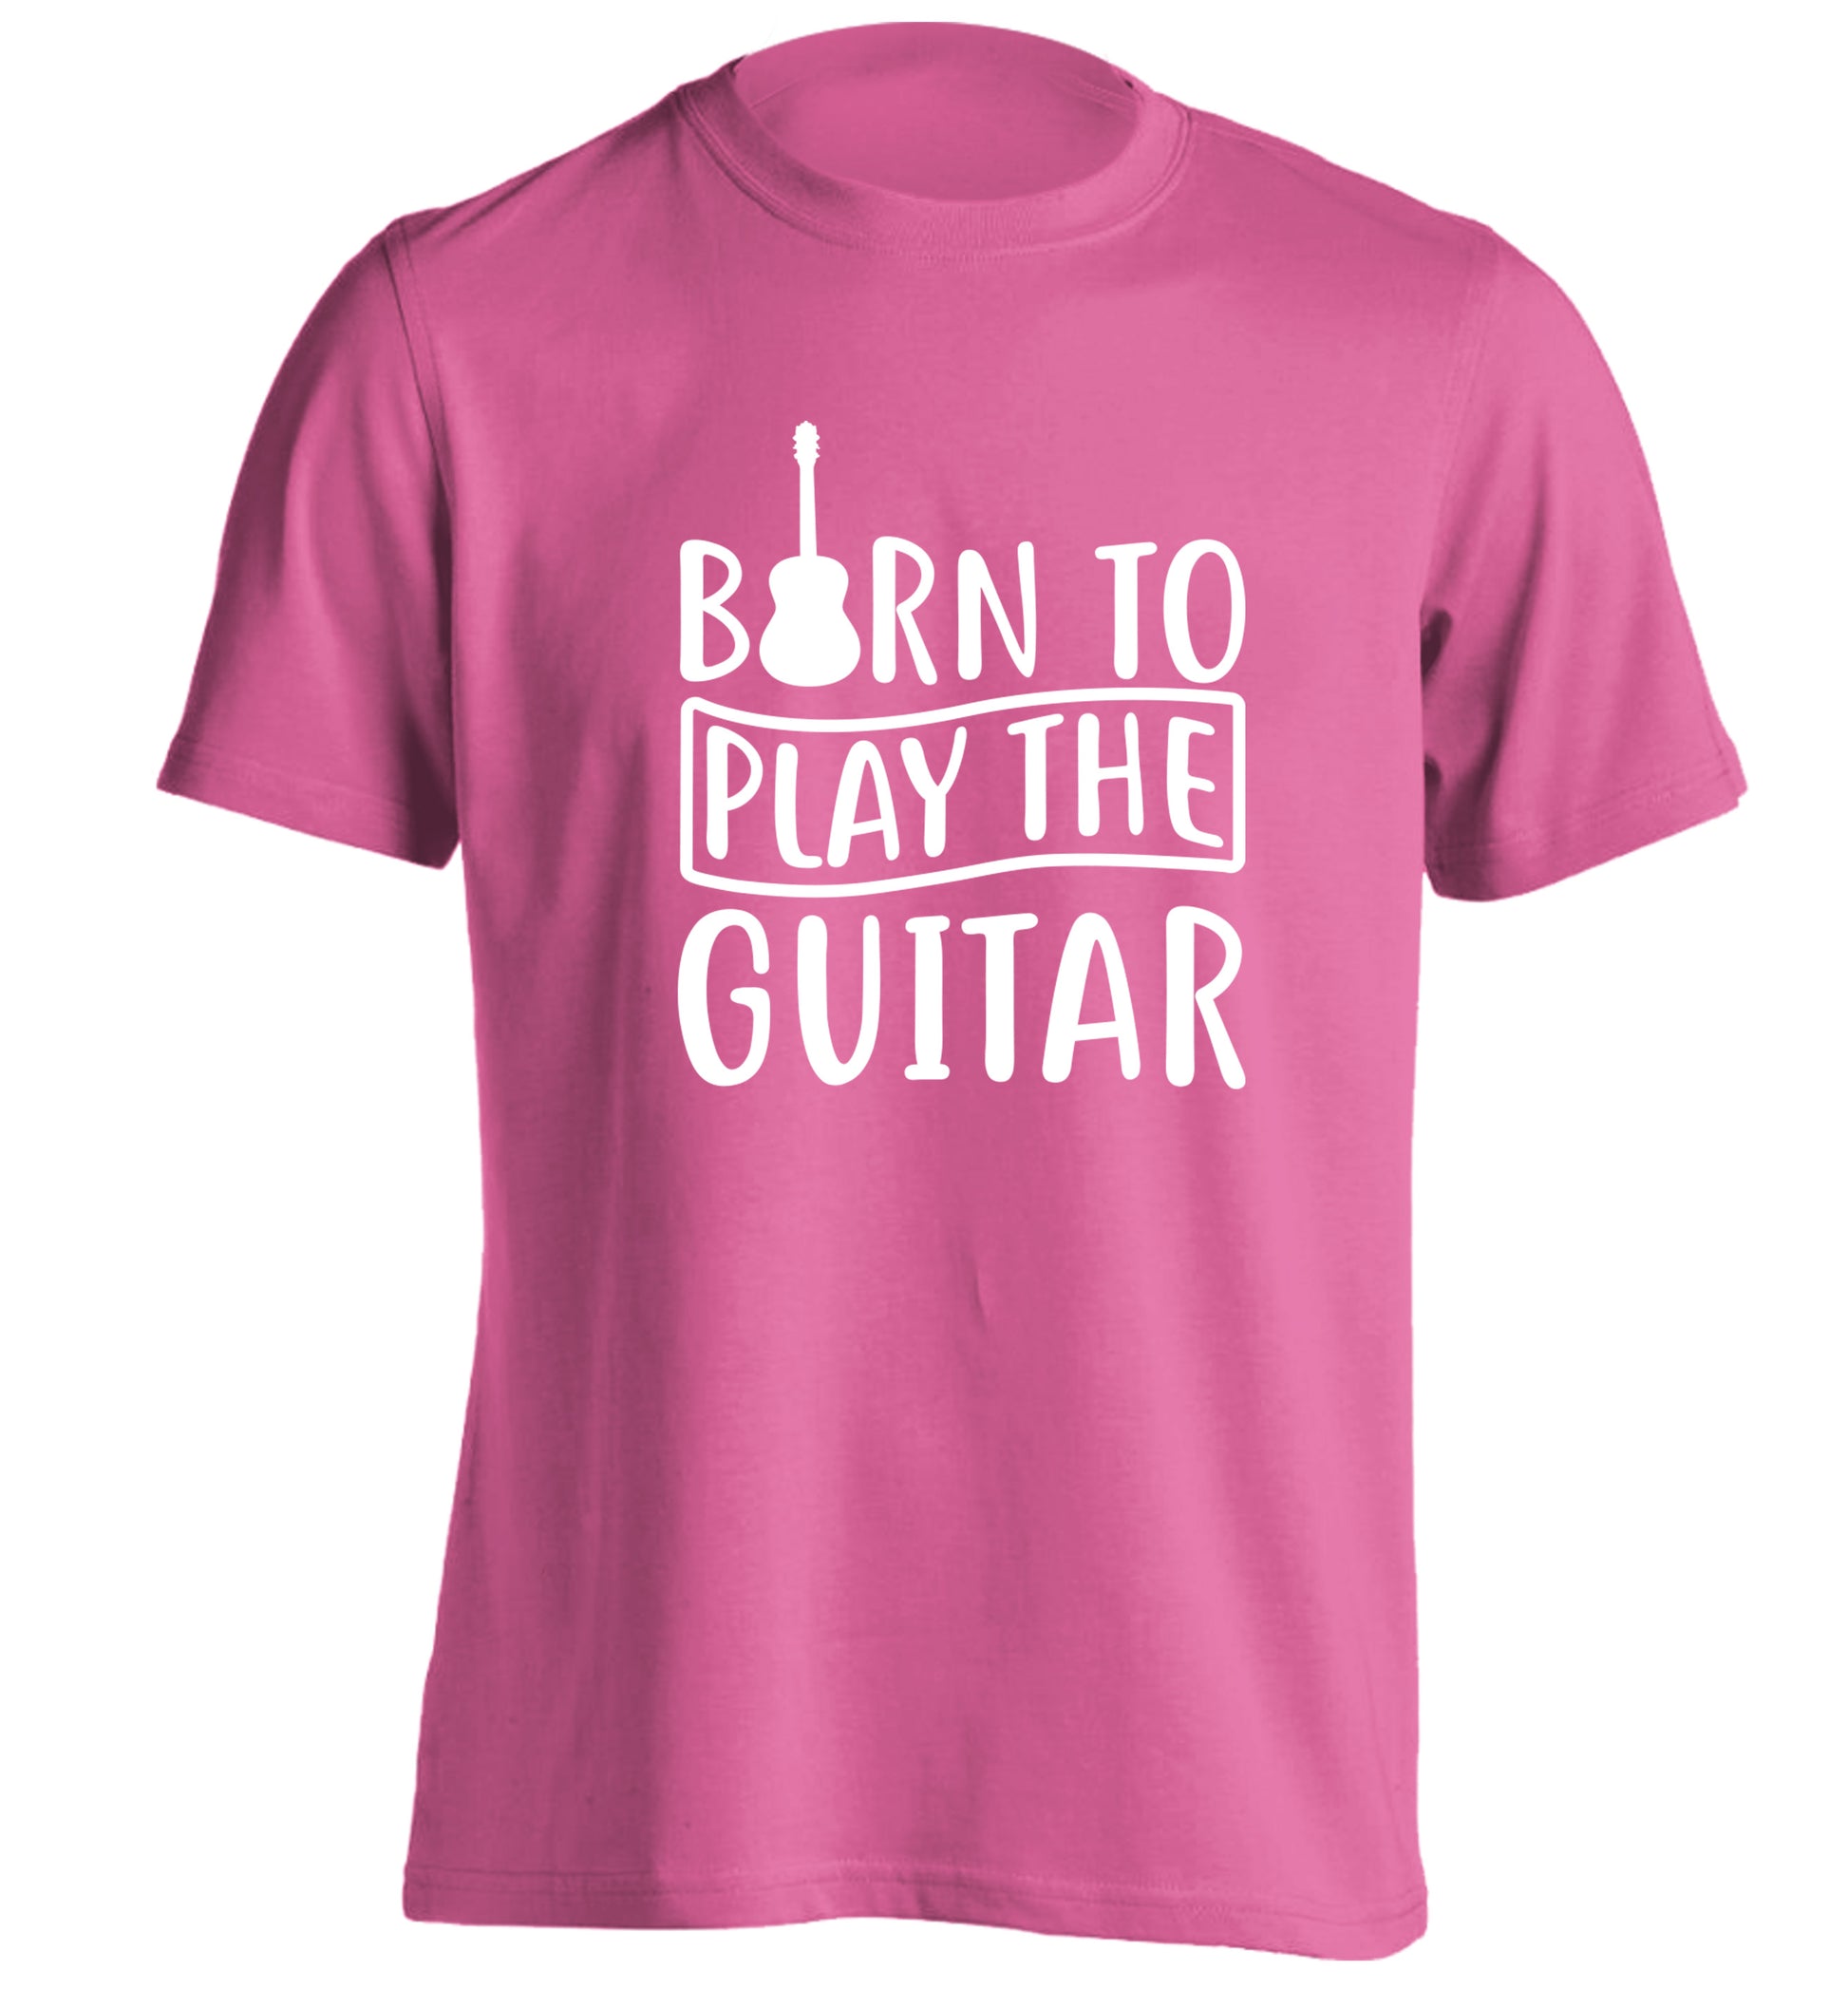 Born to play the guitar adults unisex pink Tshirt 2XL